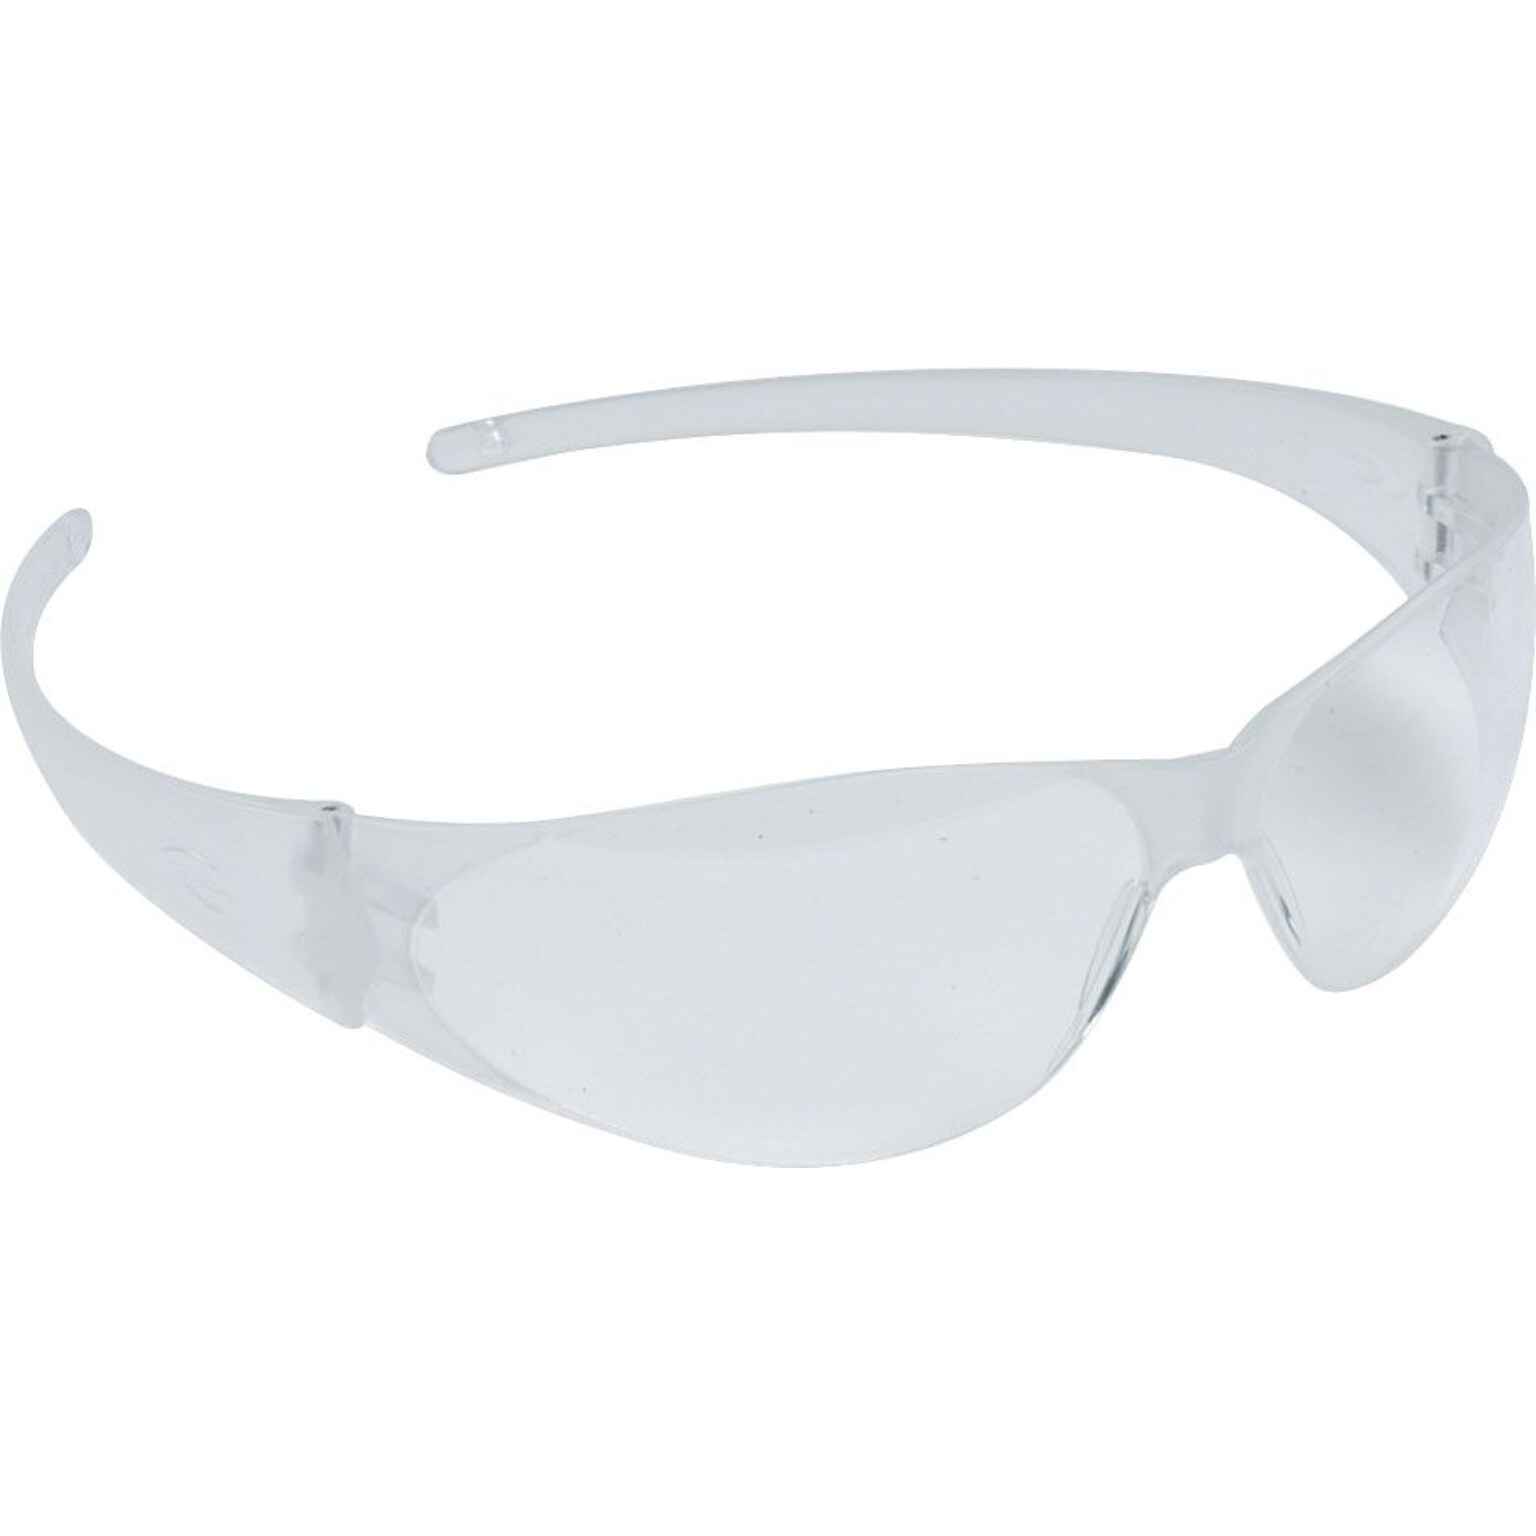 MCR Safety® Checkmate® Safety Glasses, Clear Lens, 12/Box (CK100)